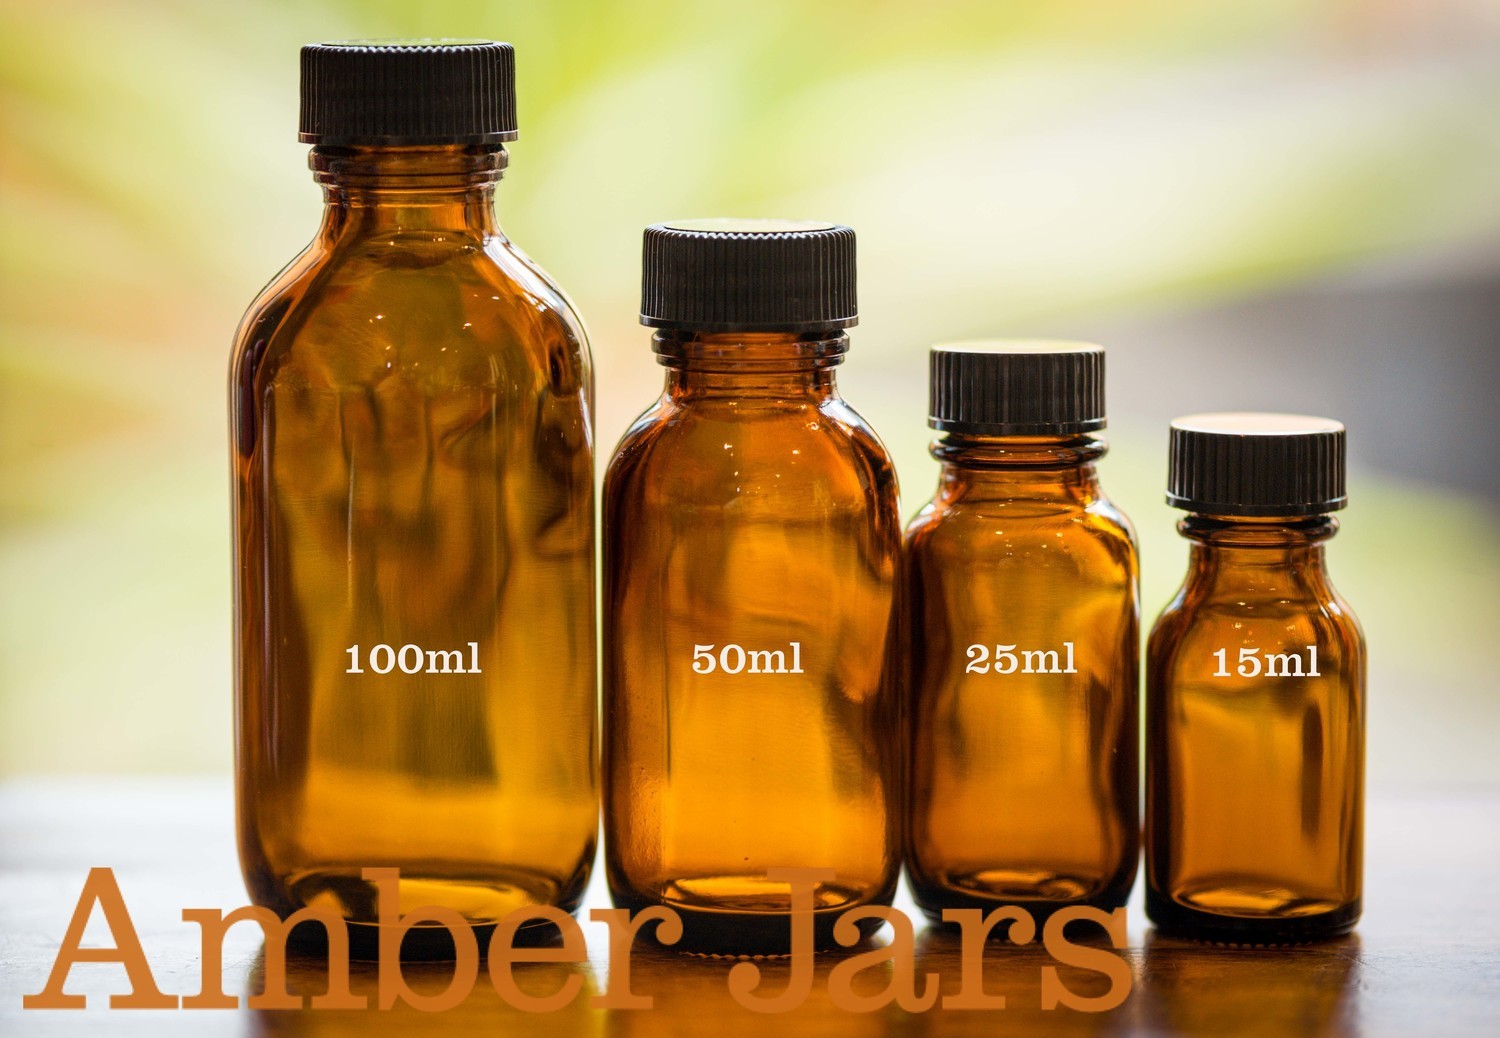 50ml Amber Glass Bottle with Black Cap - Aromatherapy, Homeopathy, Natural Medicine